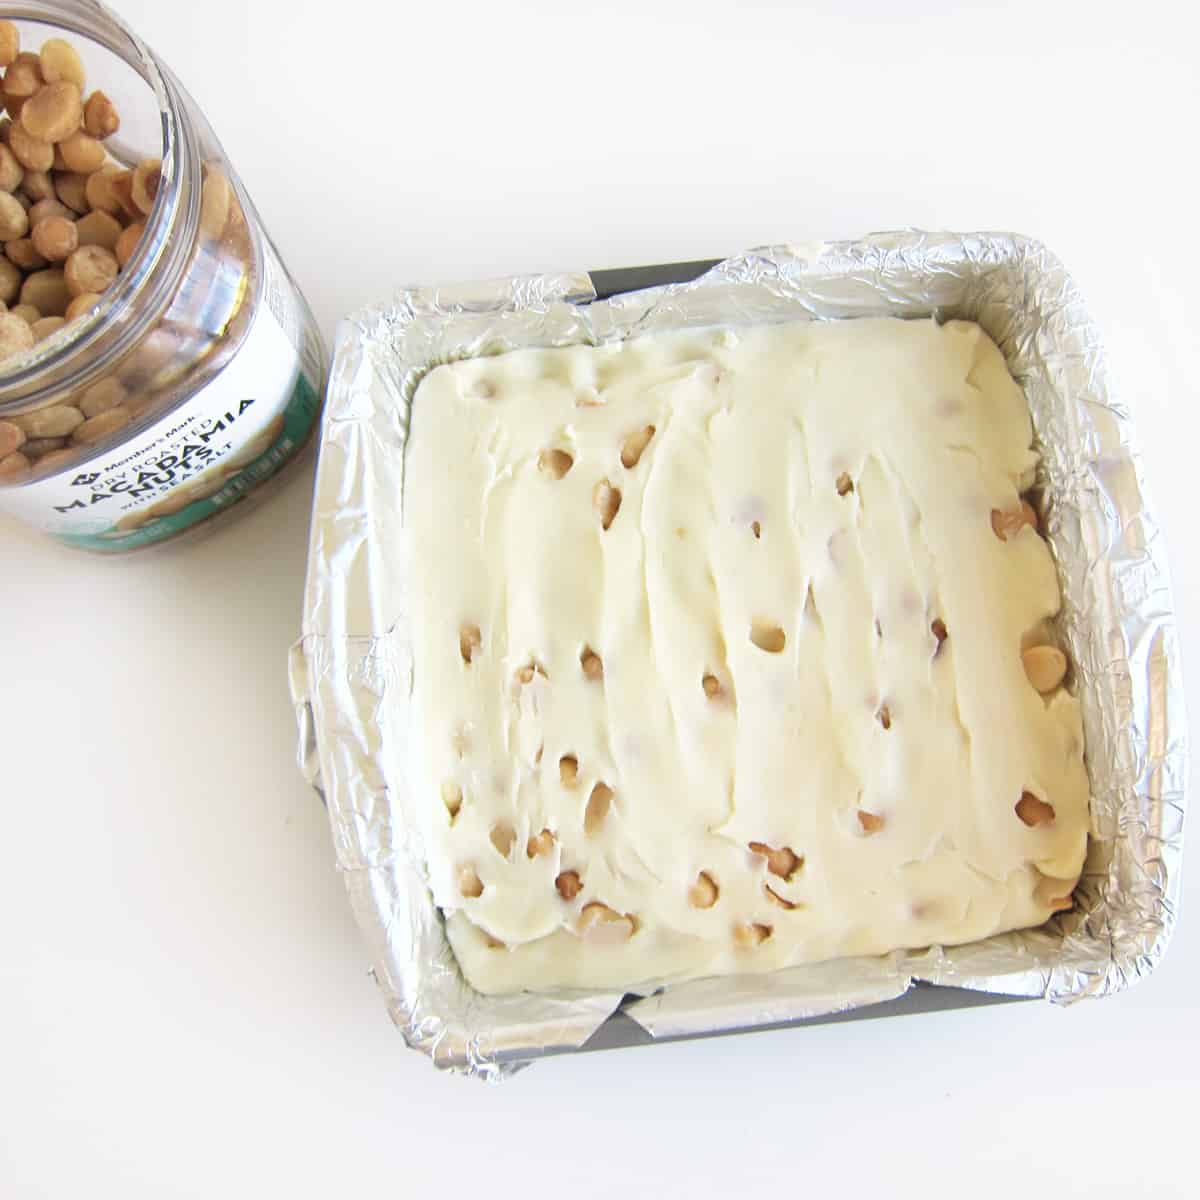 white chocolate fudge with macadamia nuts in a foil-lined pan